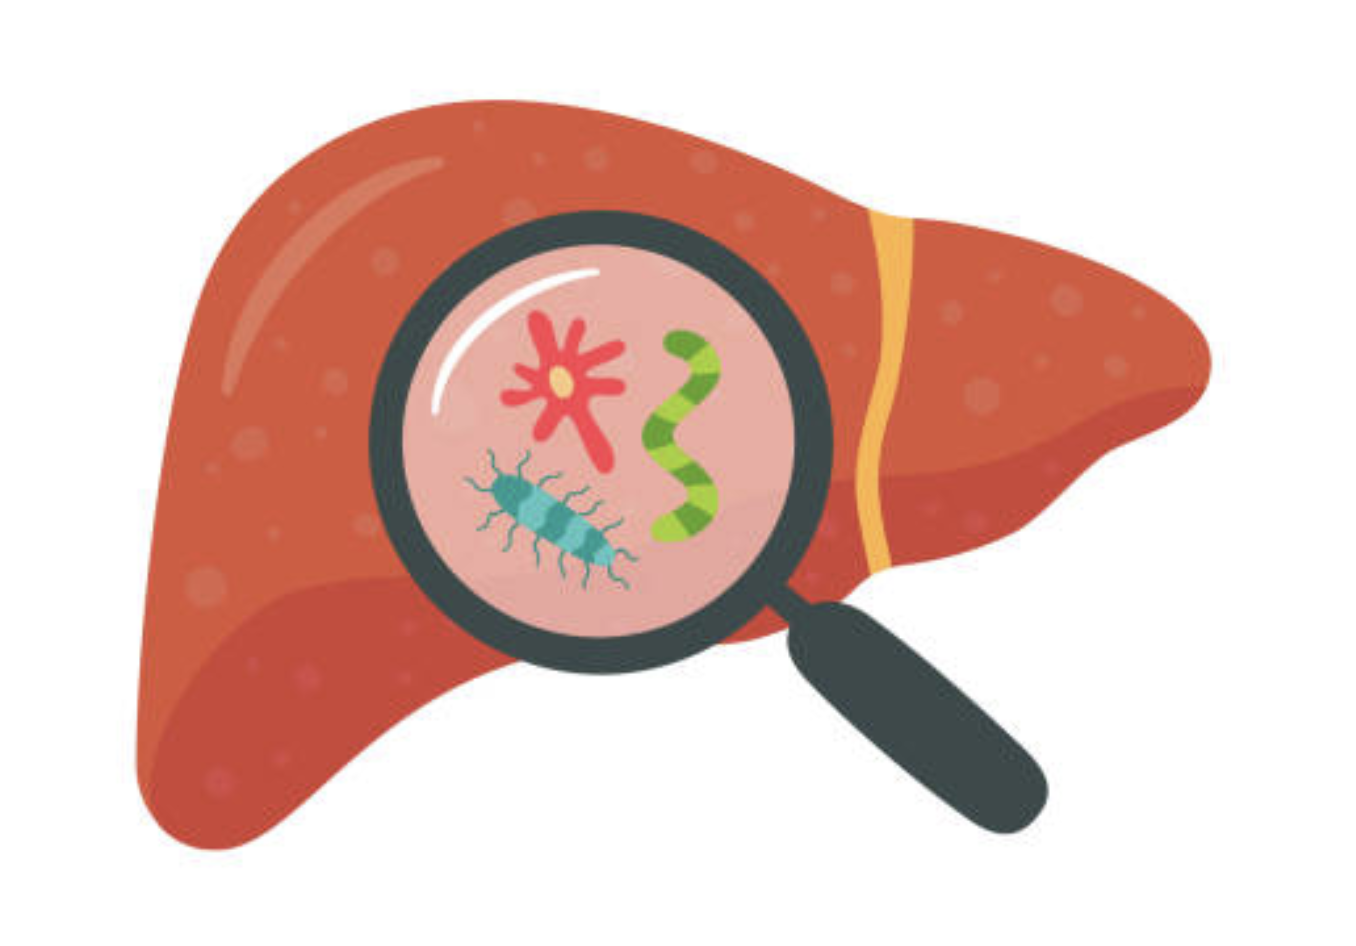 An illustration of a liver with a magnifying glass showing microbes 